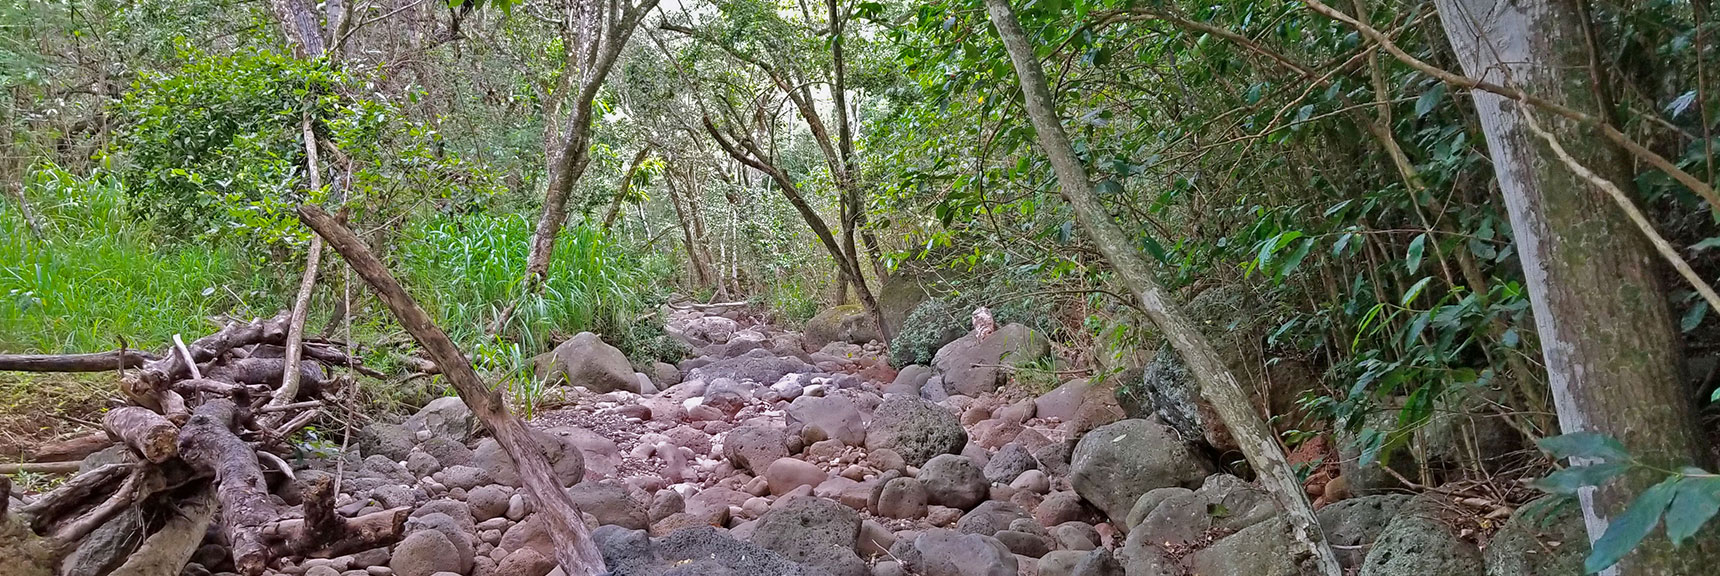 Imagine Traveling Miles Along This Stream Bed! | Hidden Hills and Jungle Above Kahana in West Maui, Hawaii